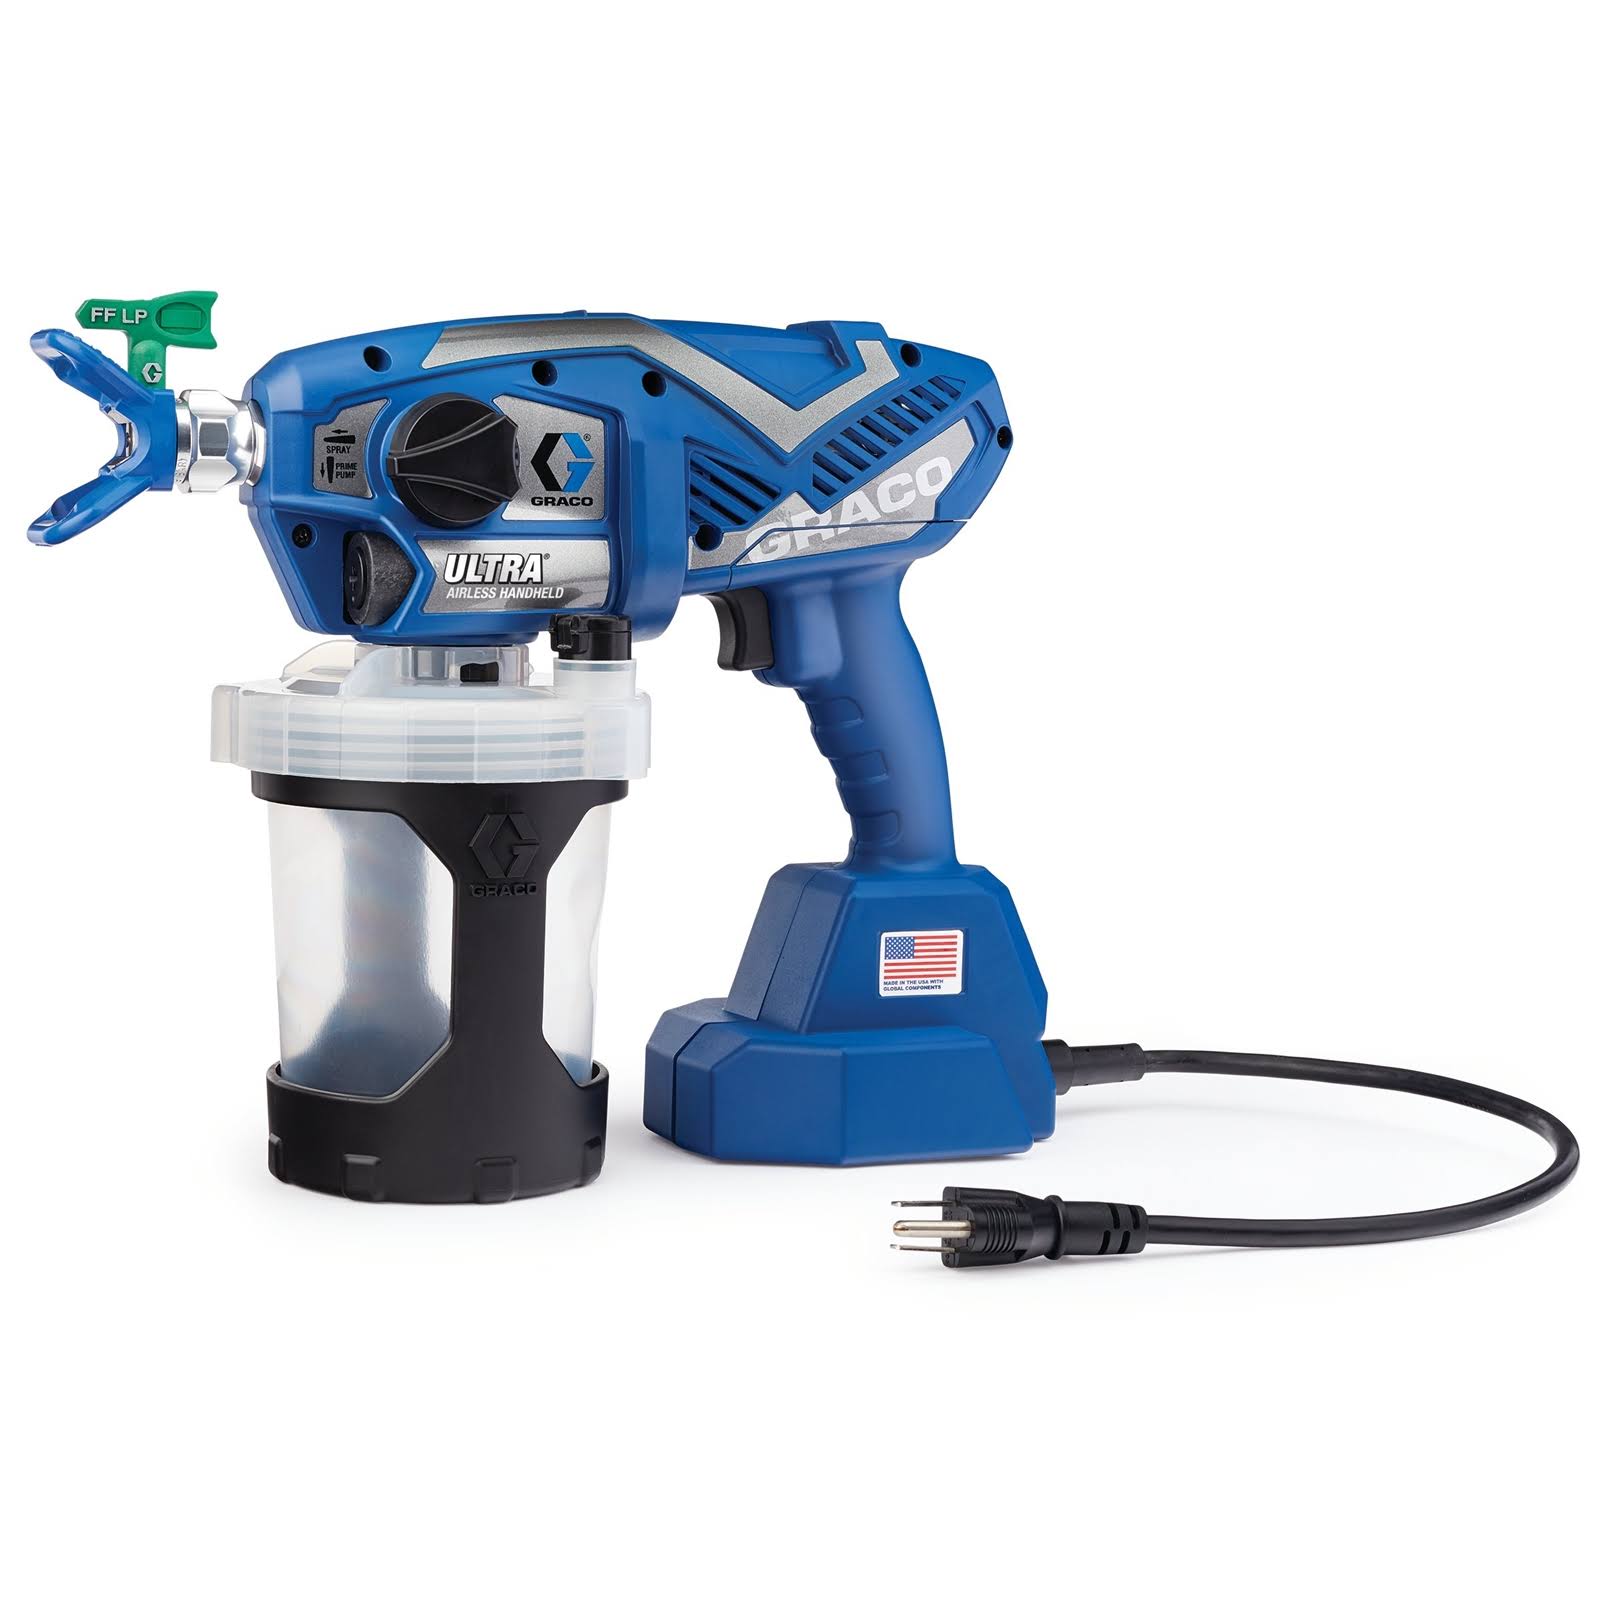 Graco Ultra Airless Handheld Sprayer with Cord